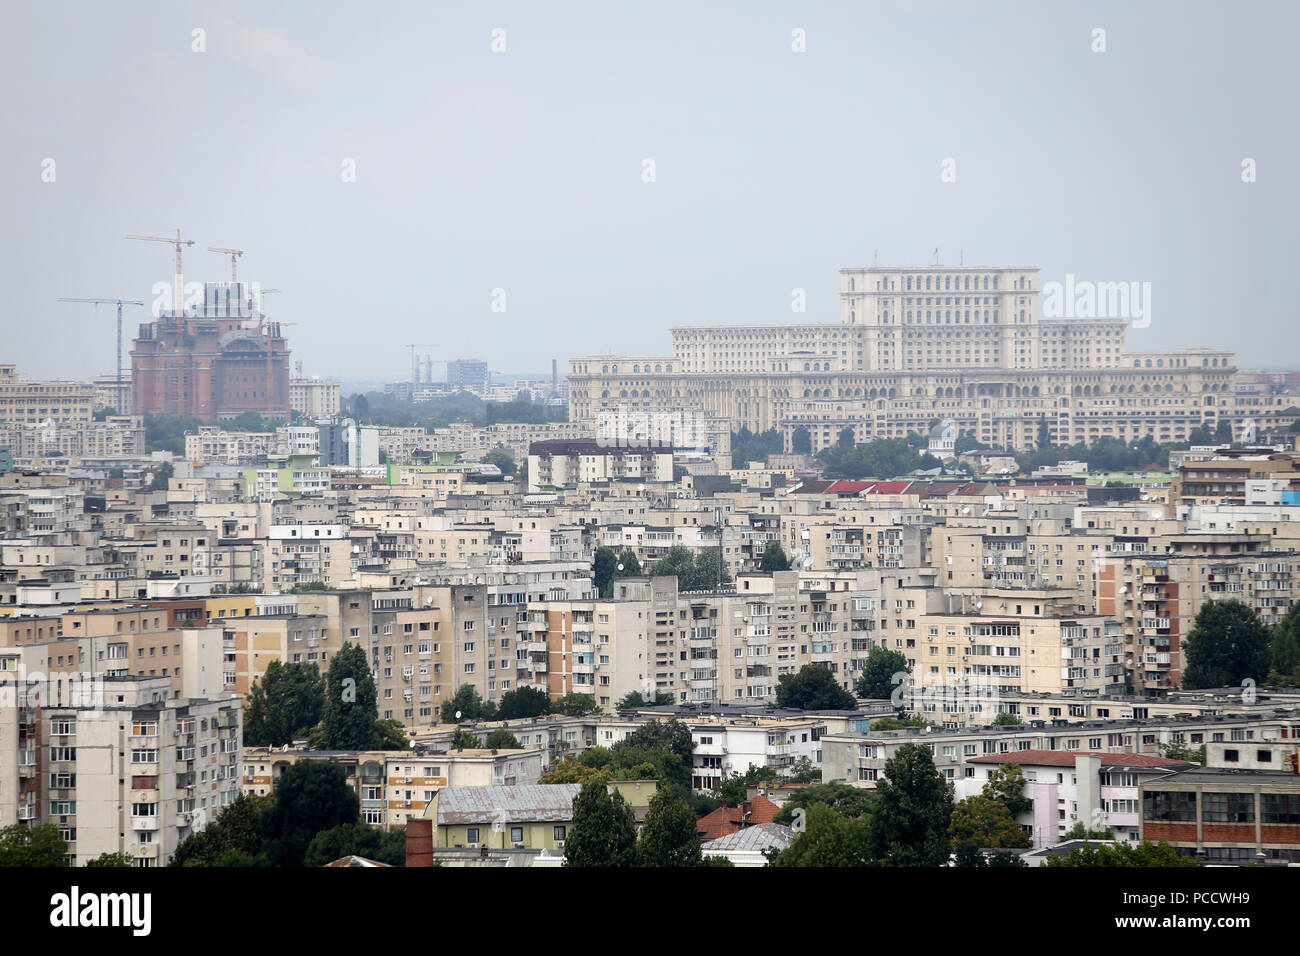 BUCHAREST, ROMANIA - July 31, 2018: Bucharest seen from a high point, with the Palace of Parliament building in the background next to the new cathedr Stock Photo